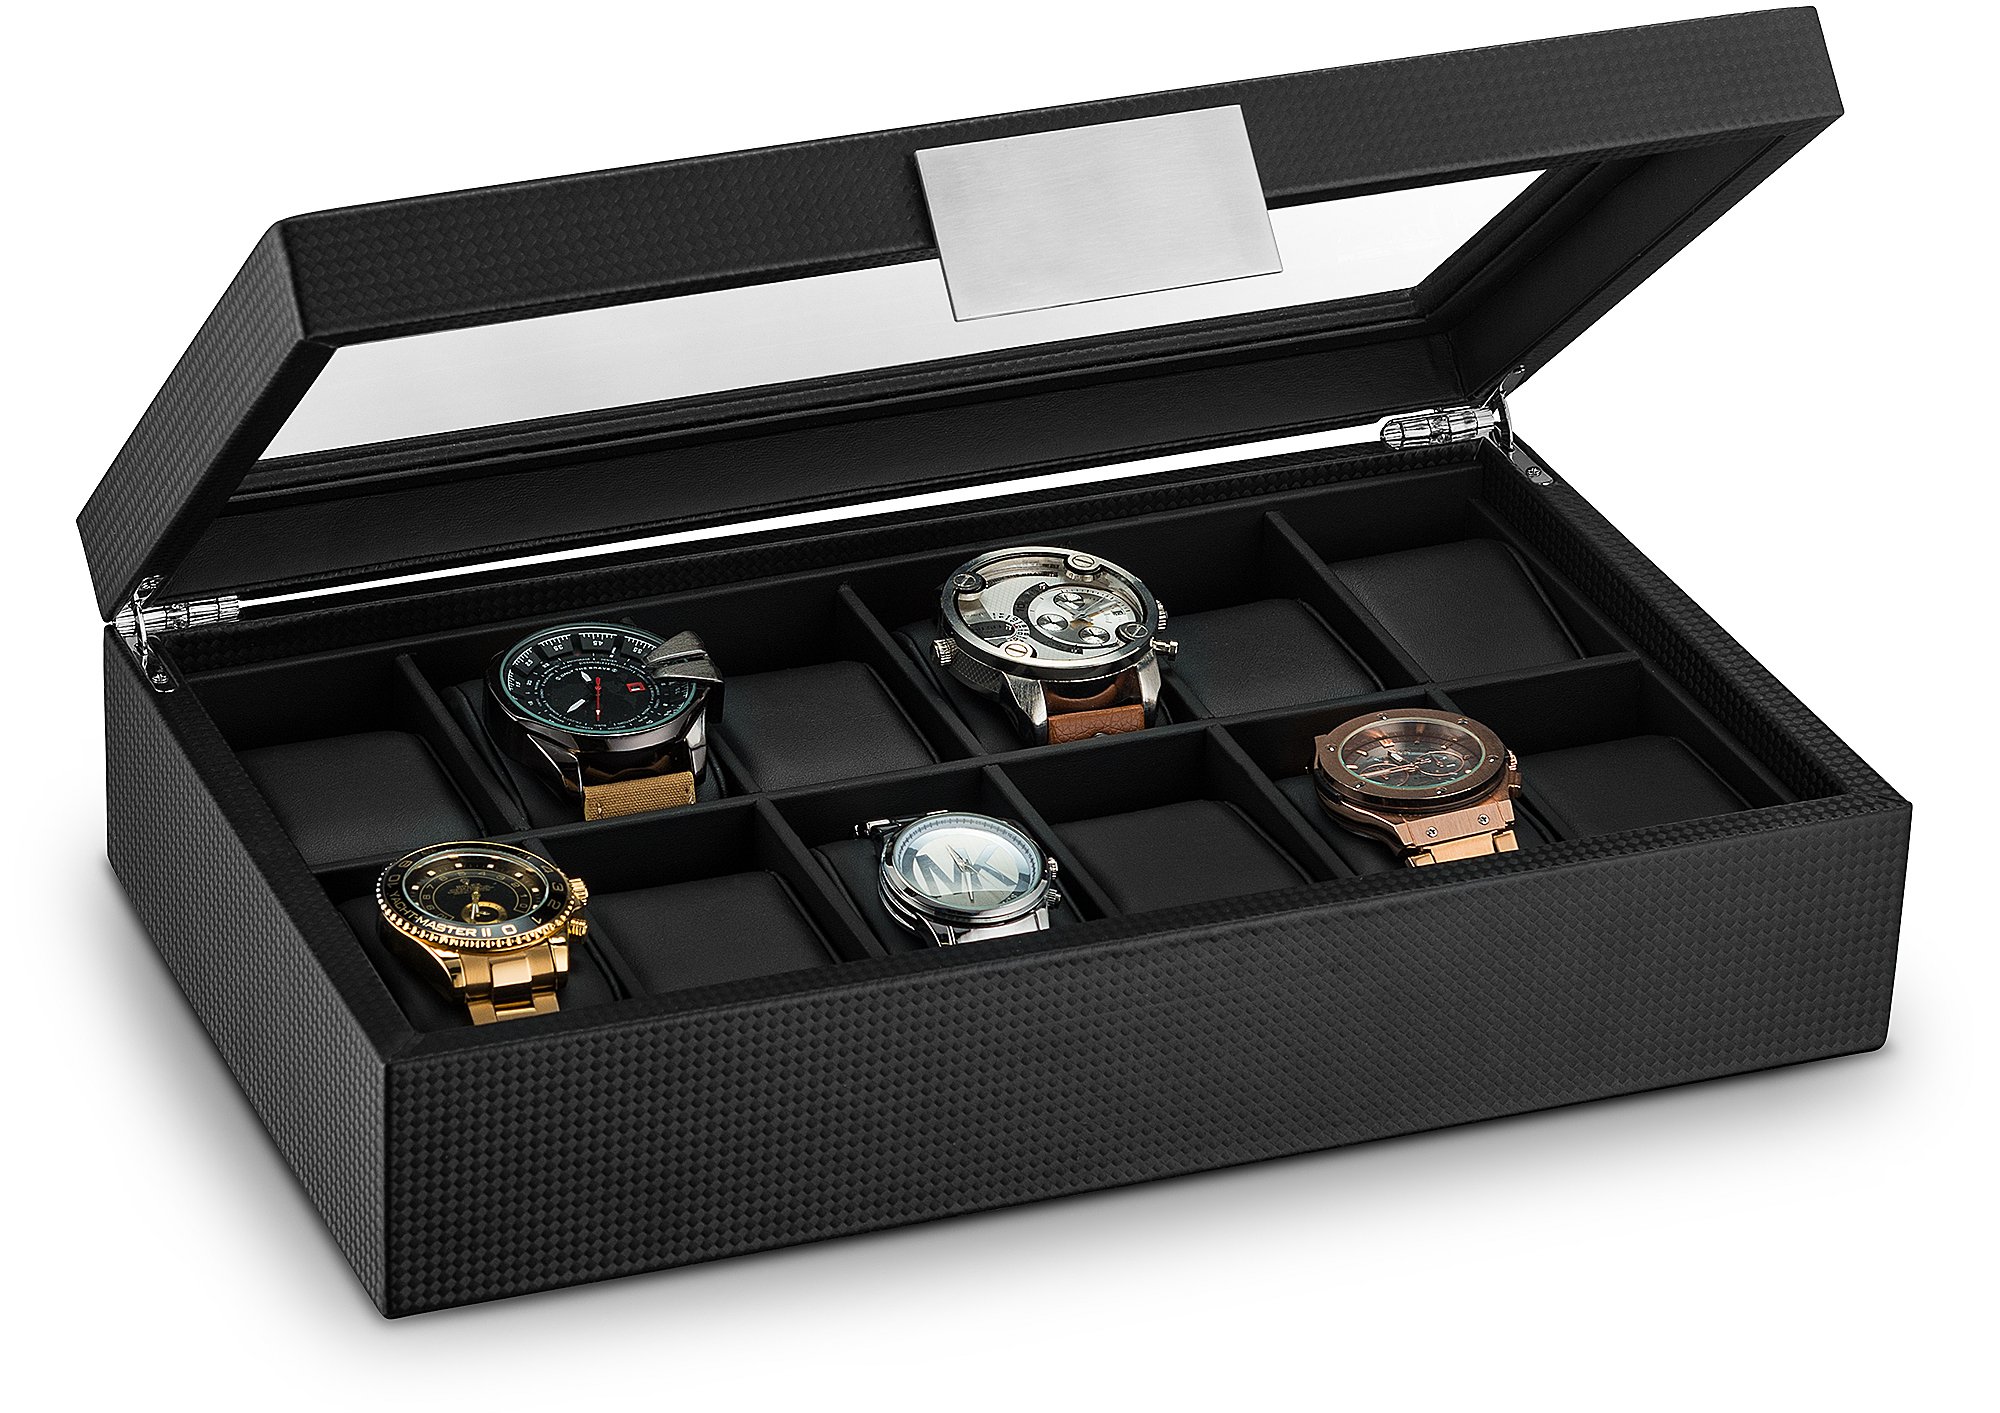 Glenor Co Watch Box for Men - 12 Slot Luxurious & Masculine Carbon Fiber Textured Watch Case, Sturdy Hinges, Large Watch Holder, Glass Top Watch Organizer for Men - Metal Accents - Black